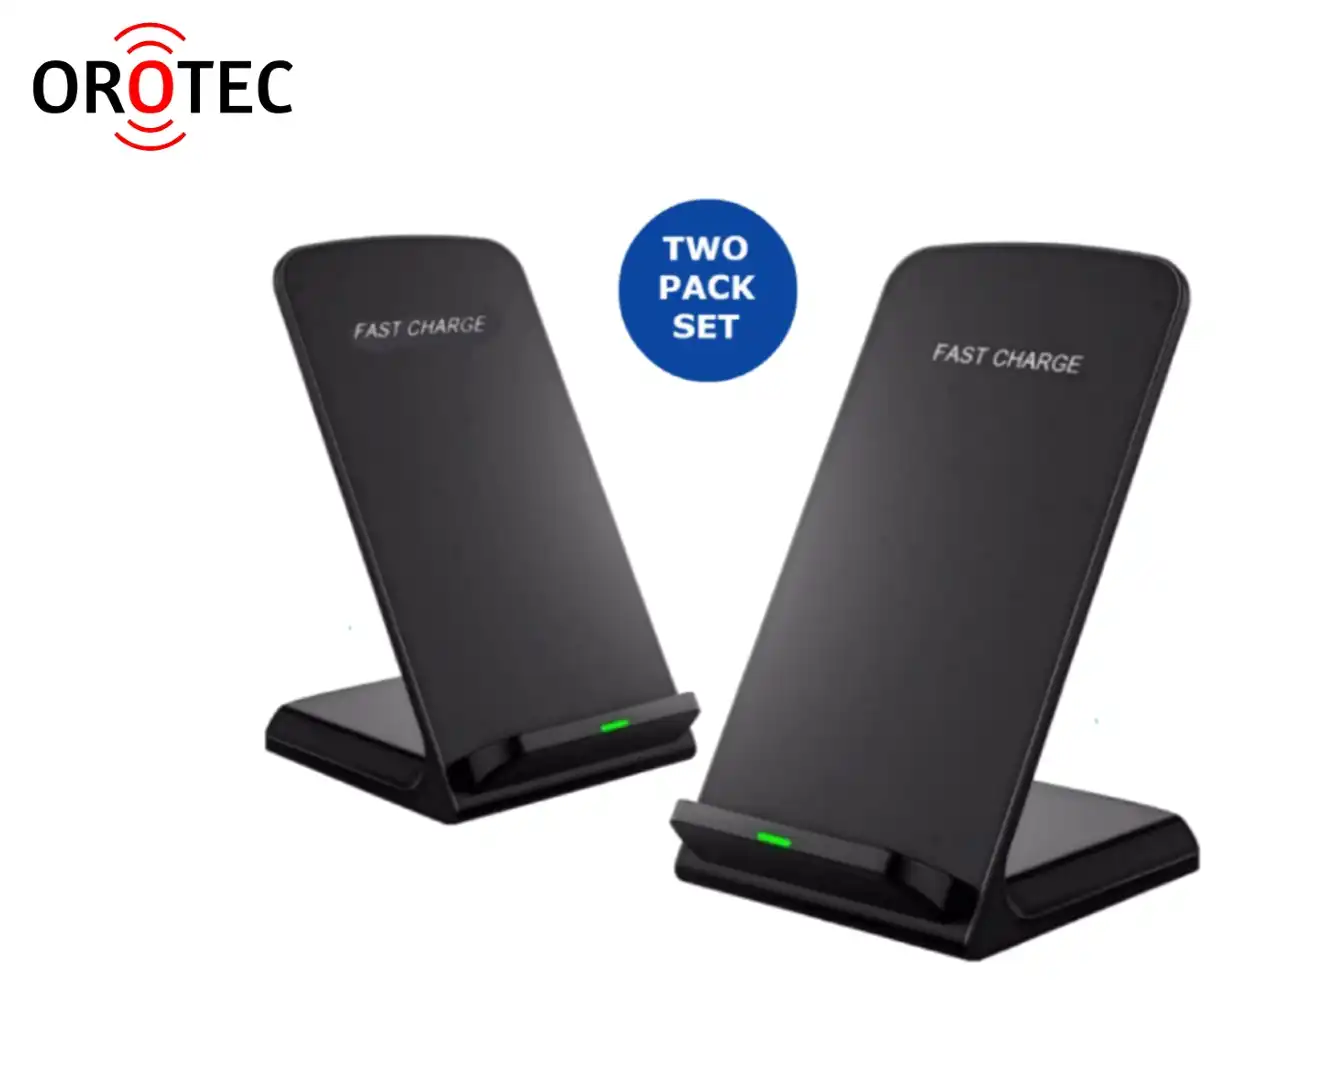 Orotec NexGen Fastcharge Wireless Charging Stand DUAL PACK